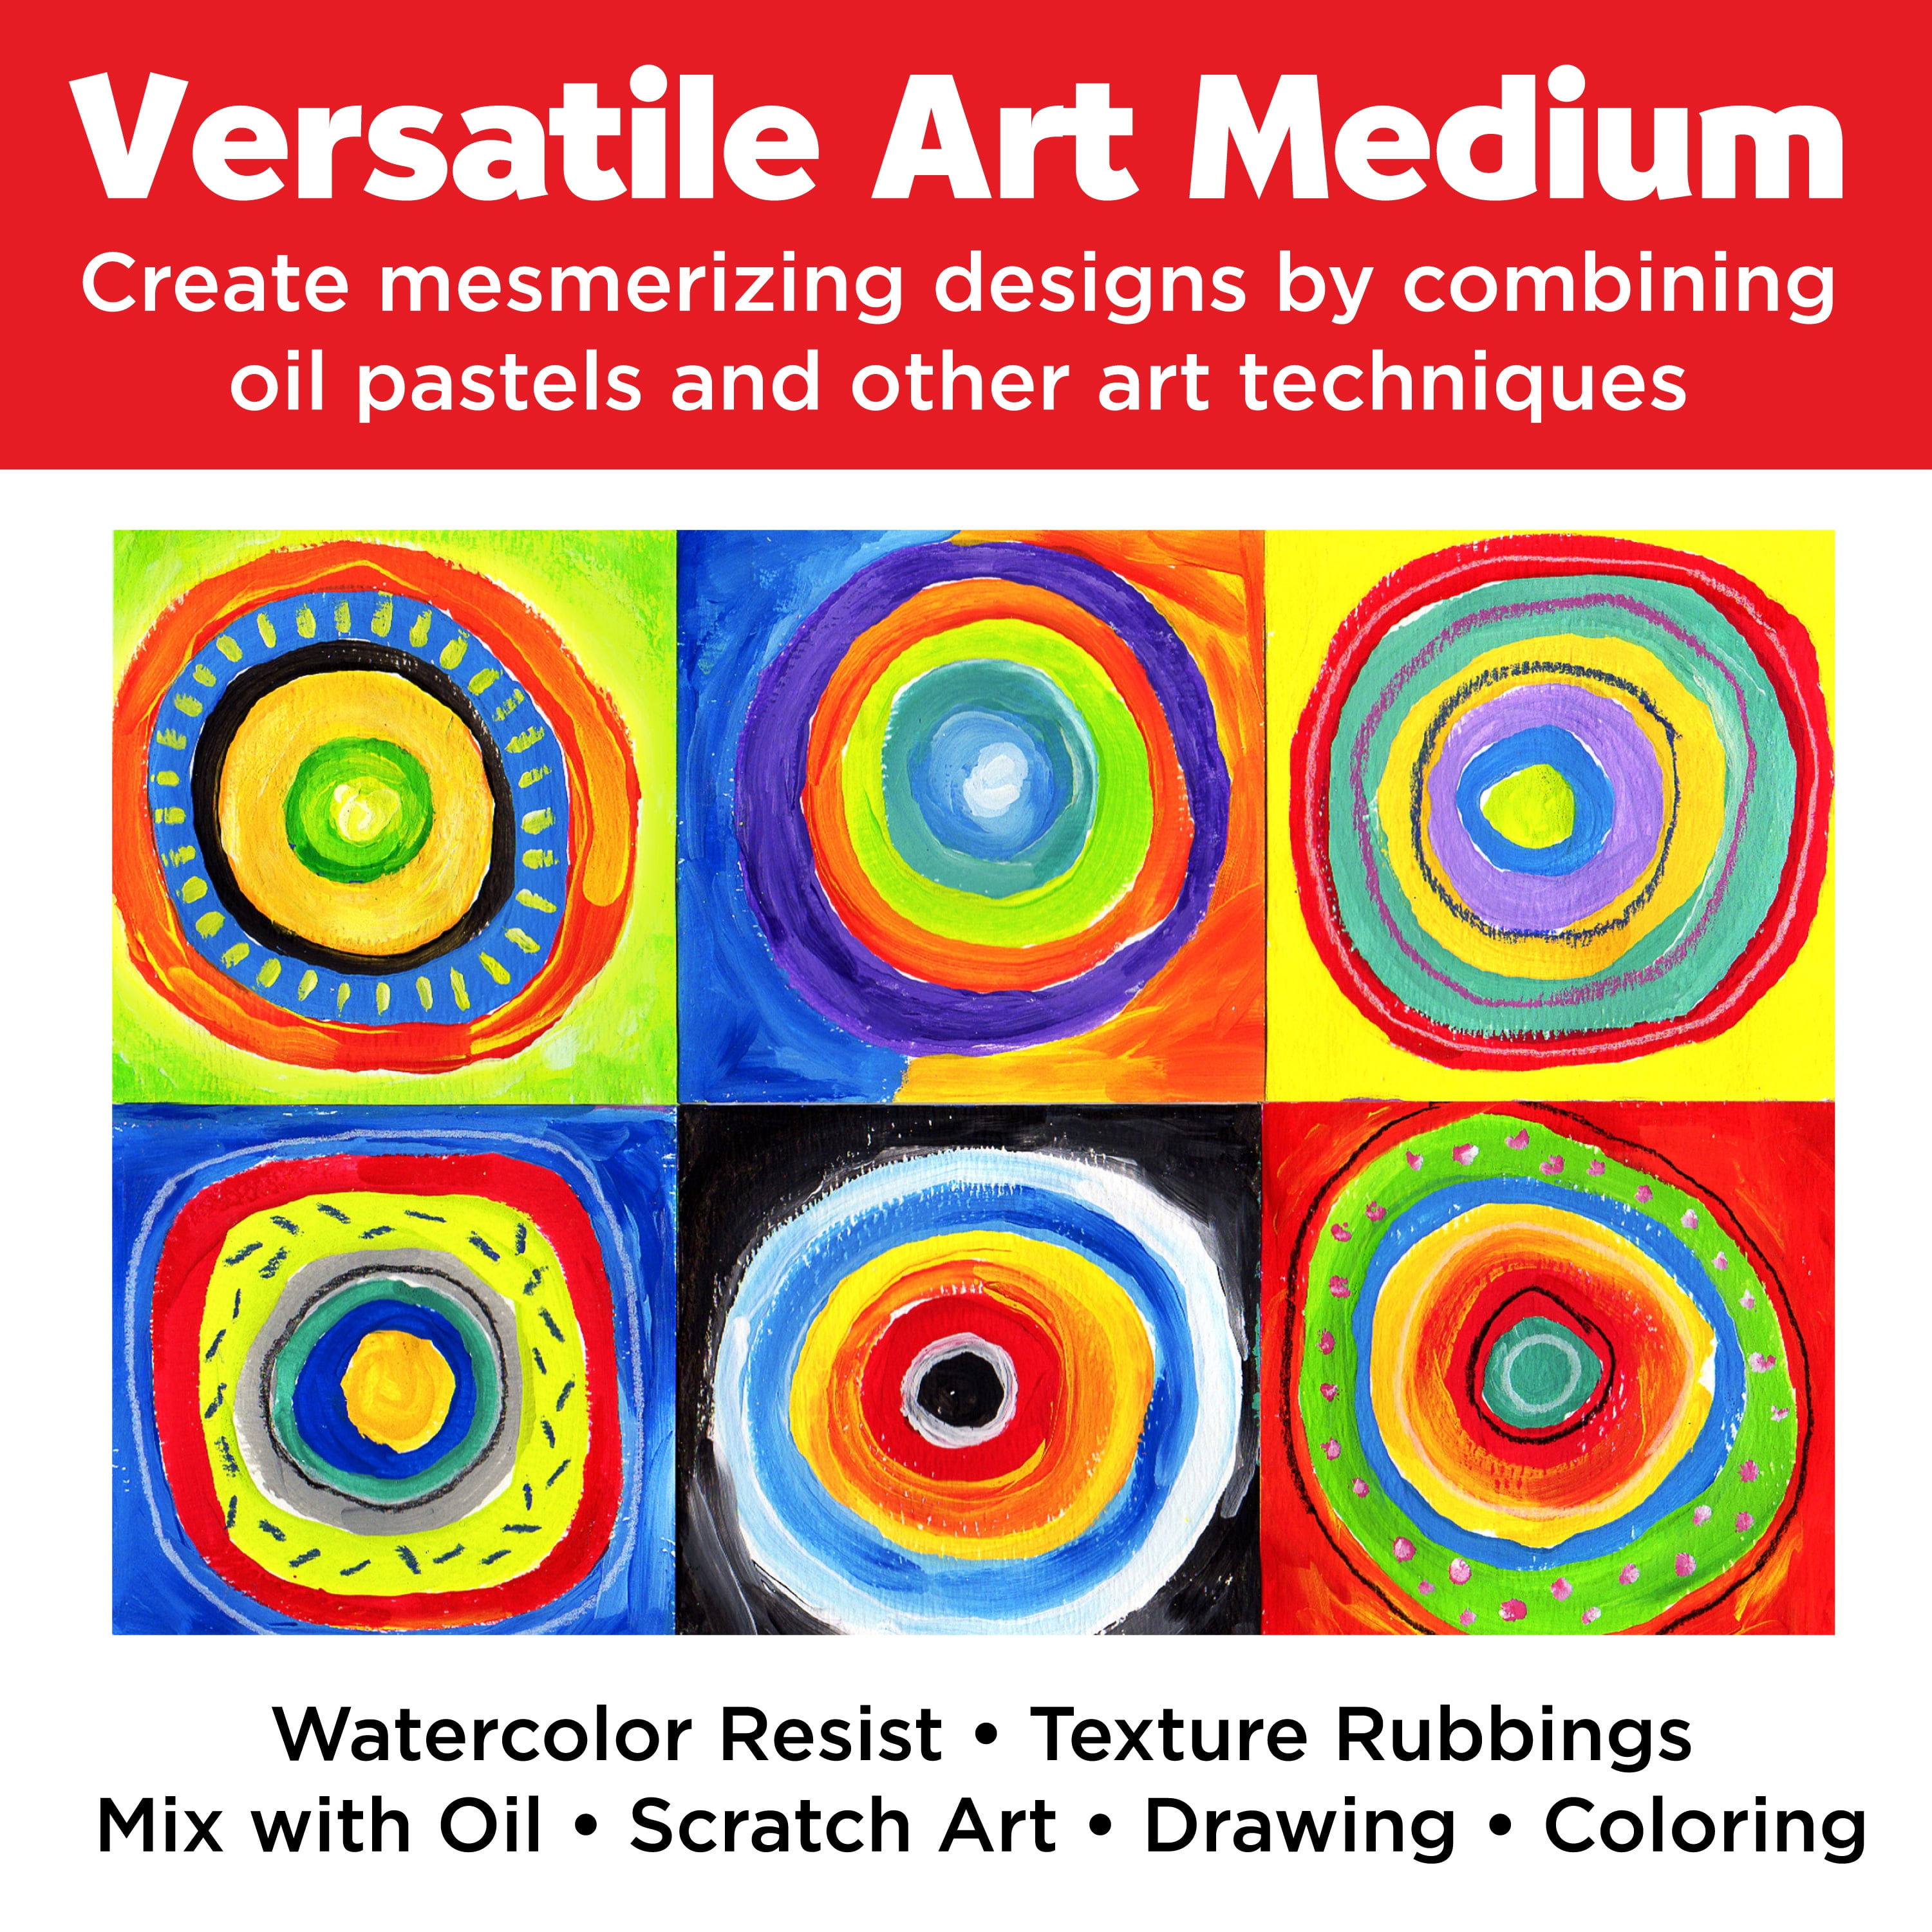 Inexpensive, versatile oil pastels for sketching and fine art - HubPages